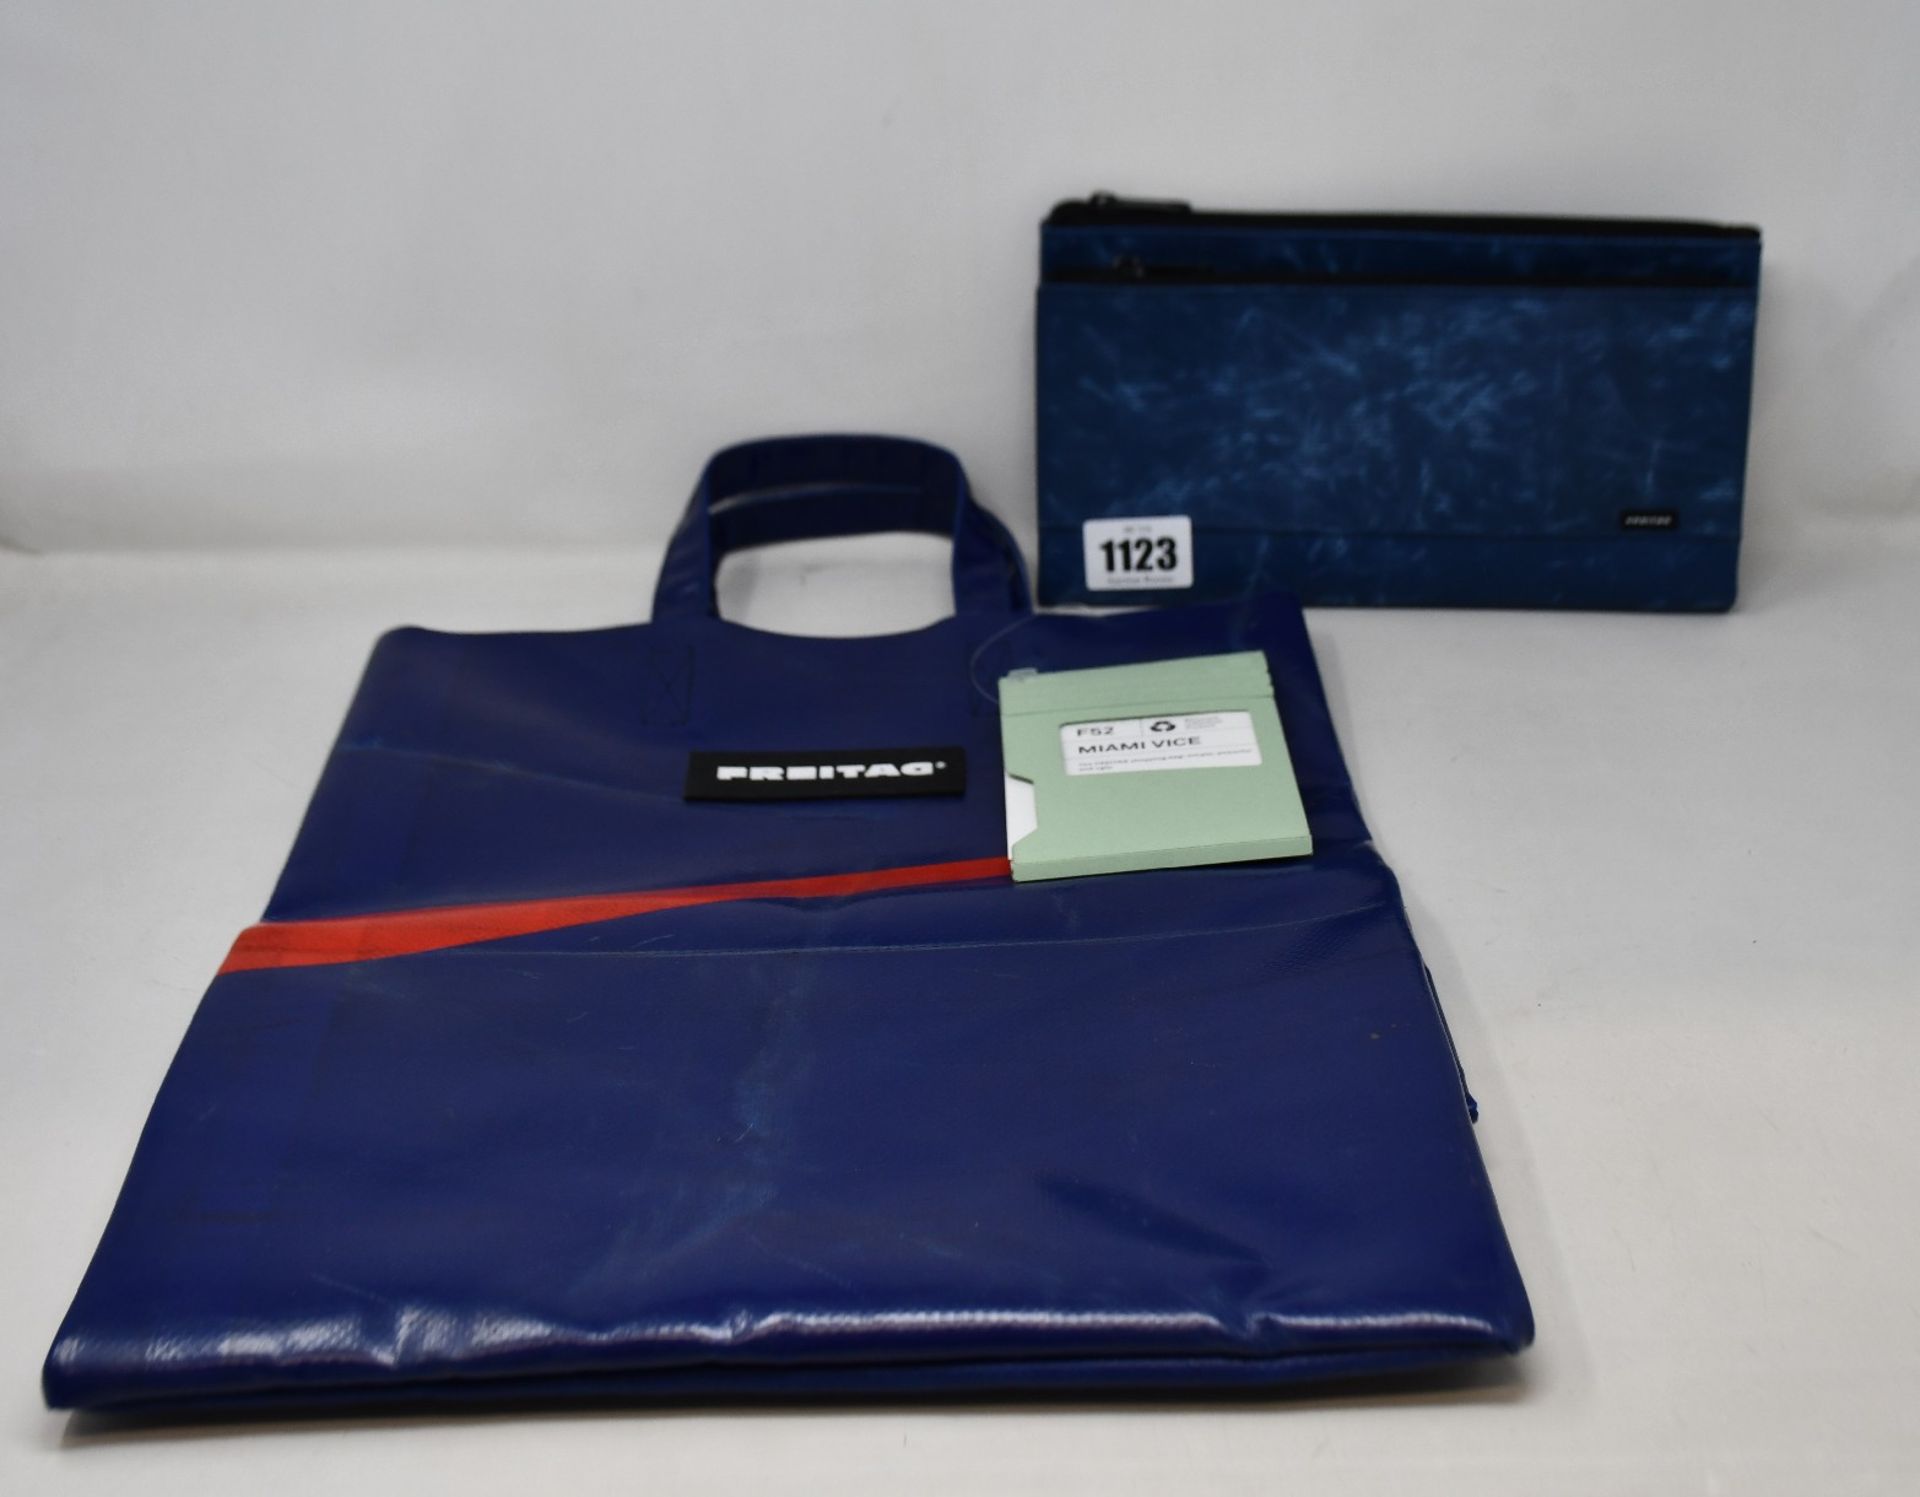 An as new Freitag F52 Miami Vice shopping bag (RRP £98) and a F271 Masikura pouch bag (RRP £80).